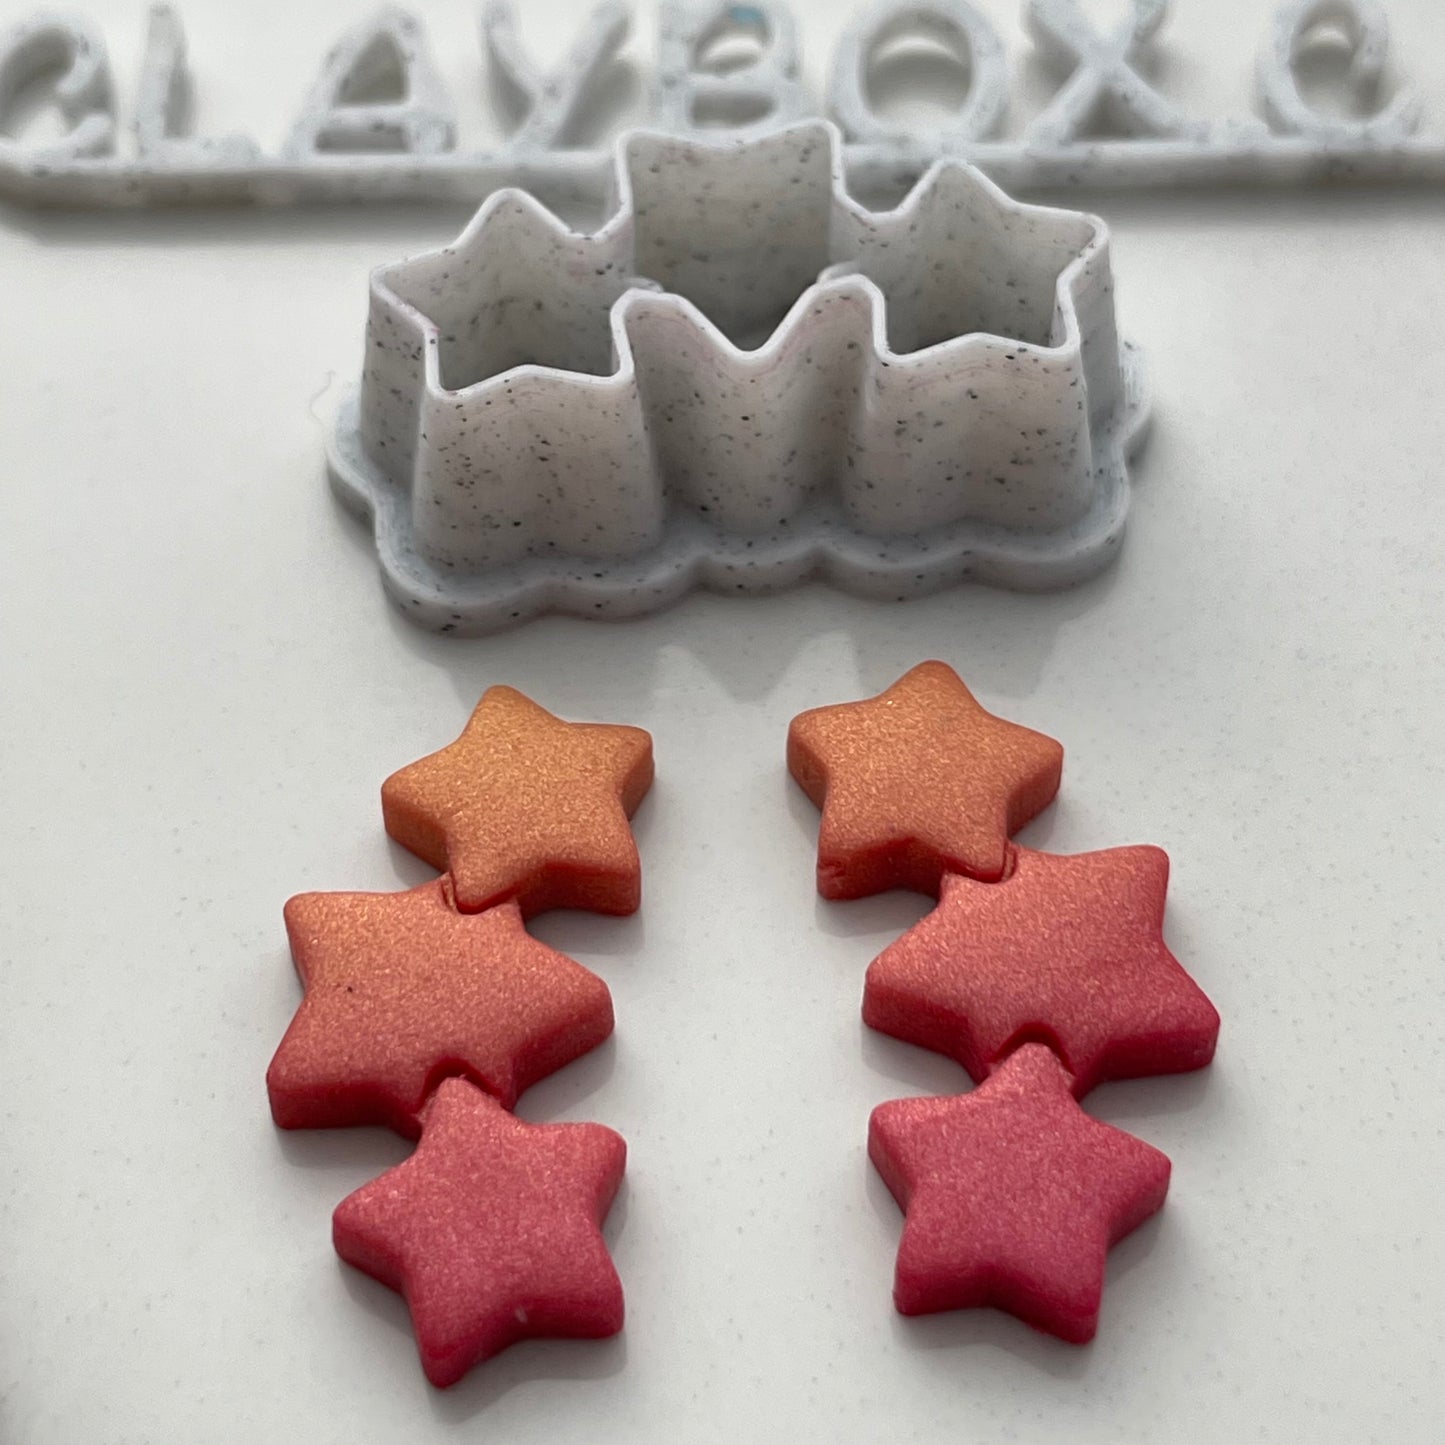 Star cluster combined stamp/cutter